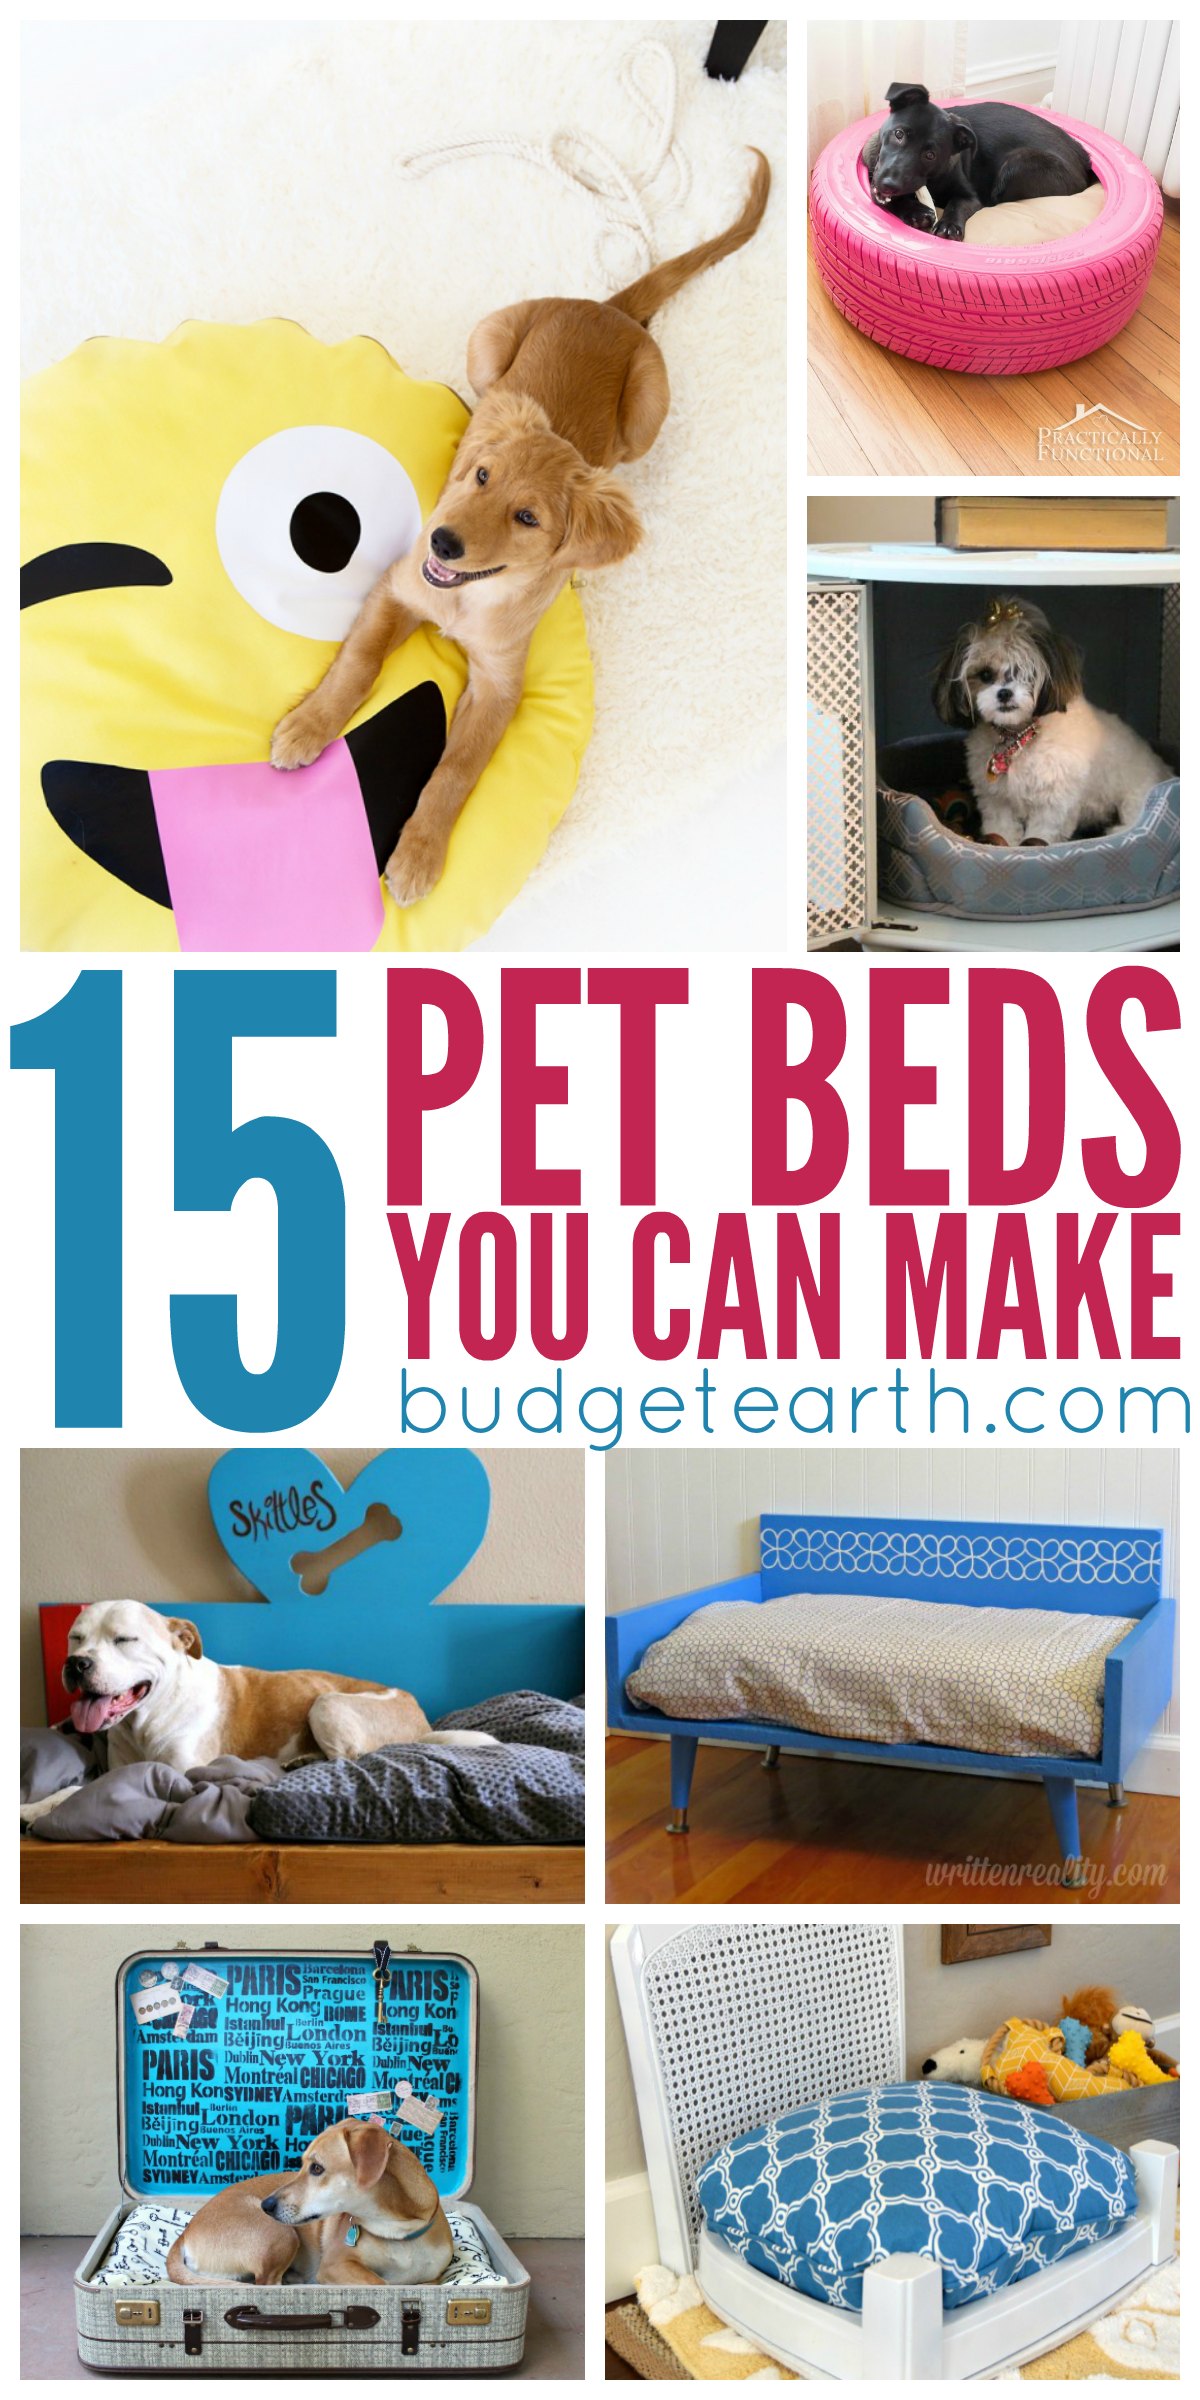 Want to make your own dog house? Check out these 15 DIY Pet Beds Your can Make at Home here!